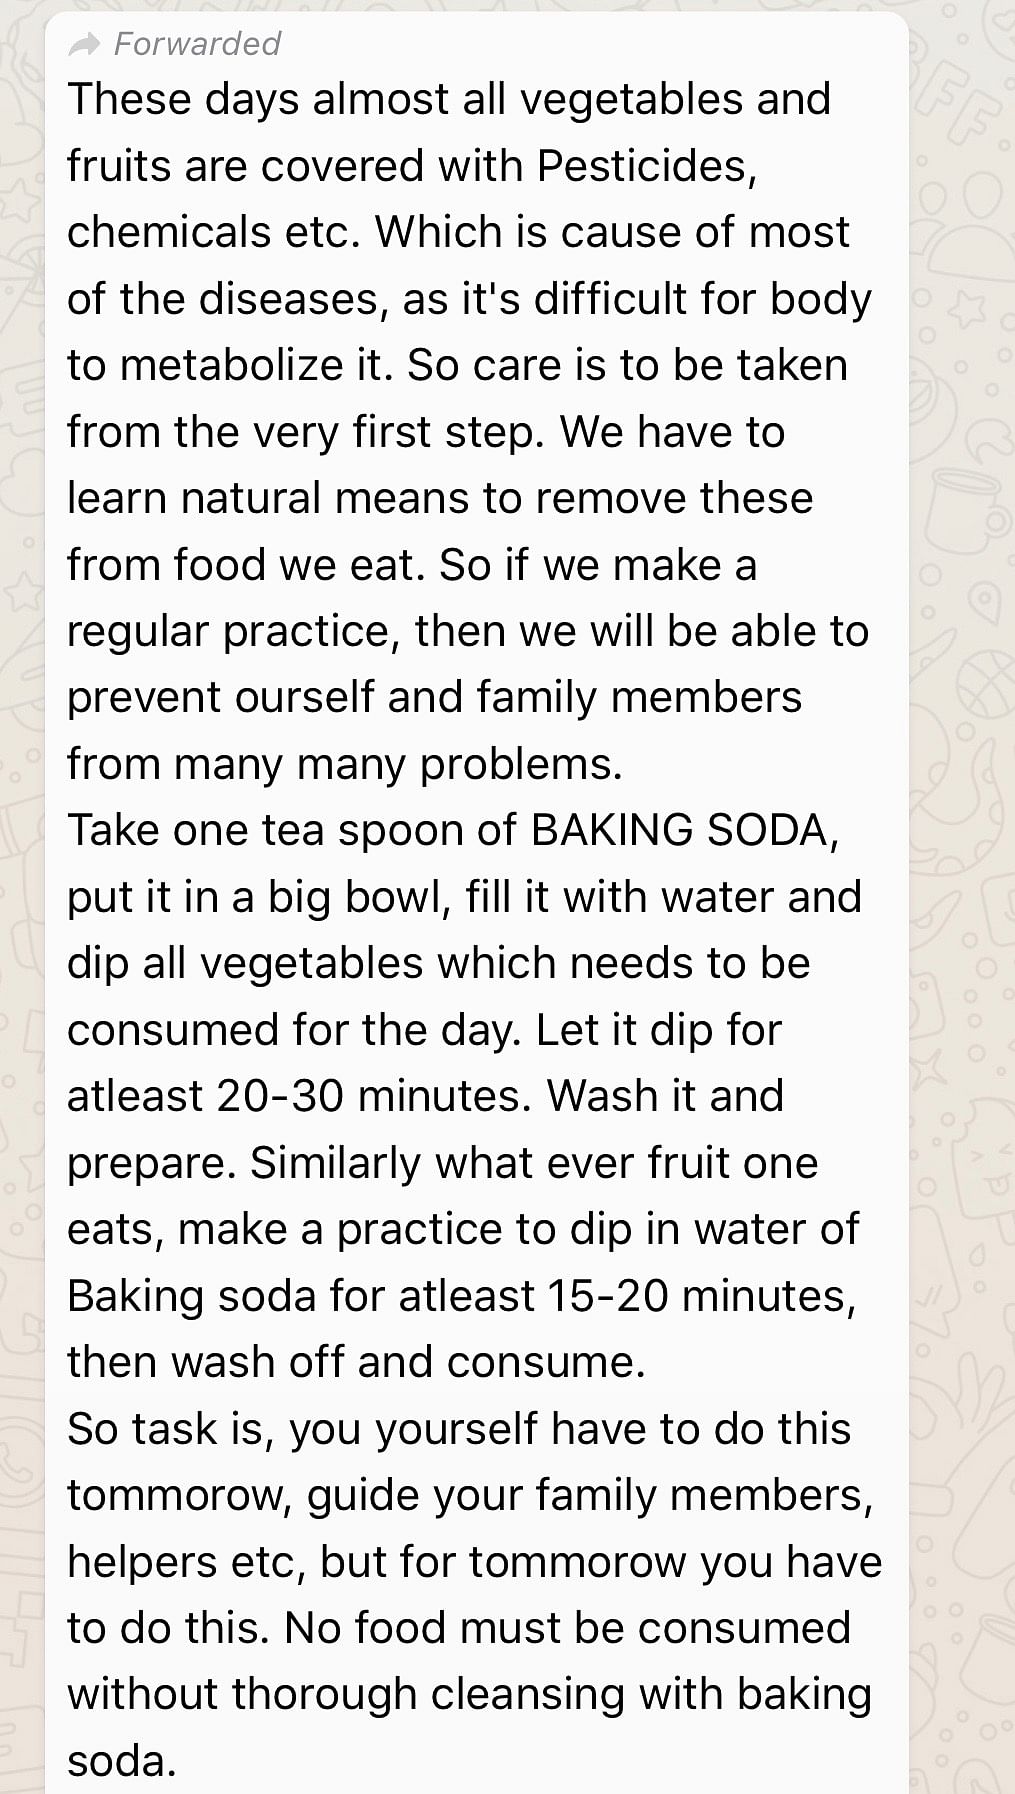 A WhatsApp message claims that washing fruits & vegetables with baking soda can remove pesticides from them.